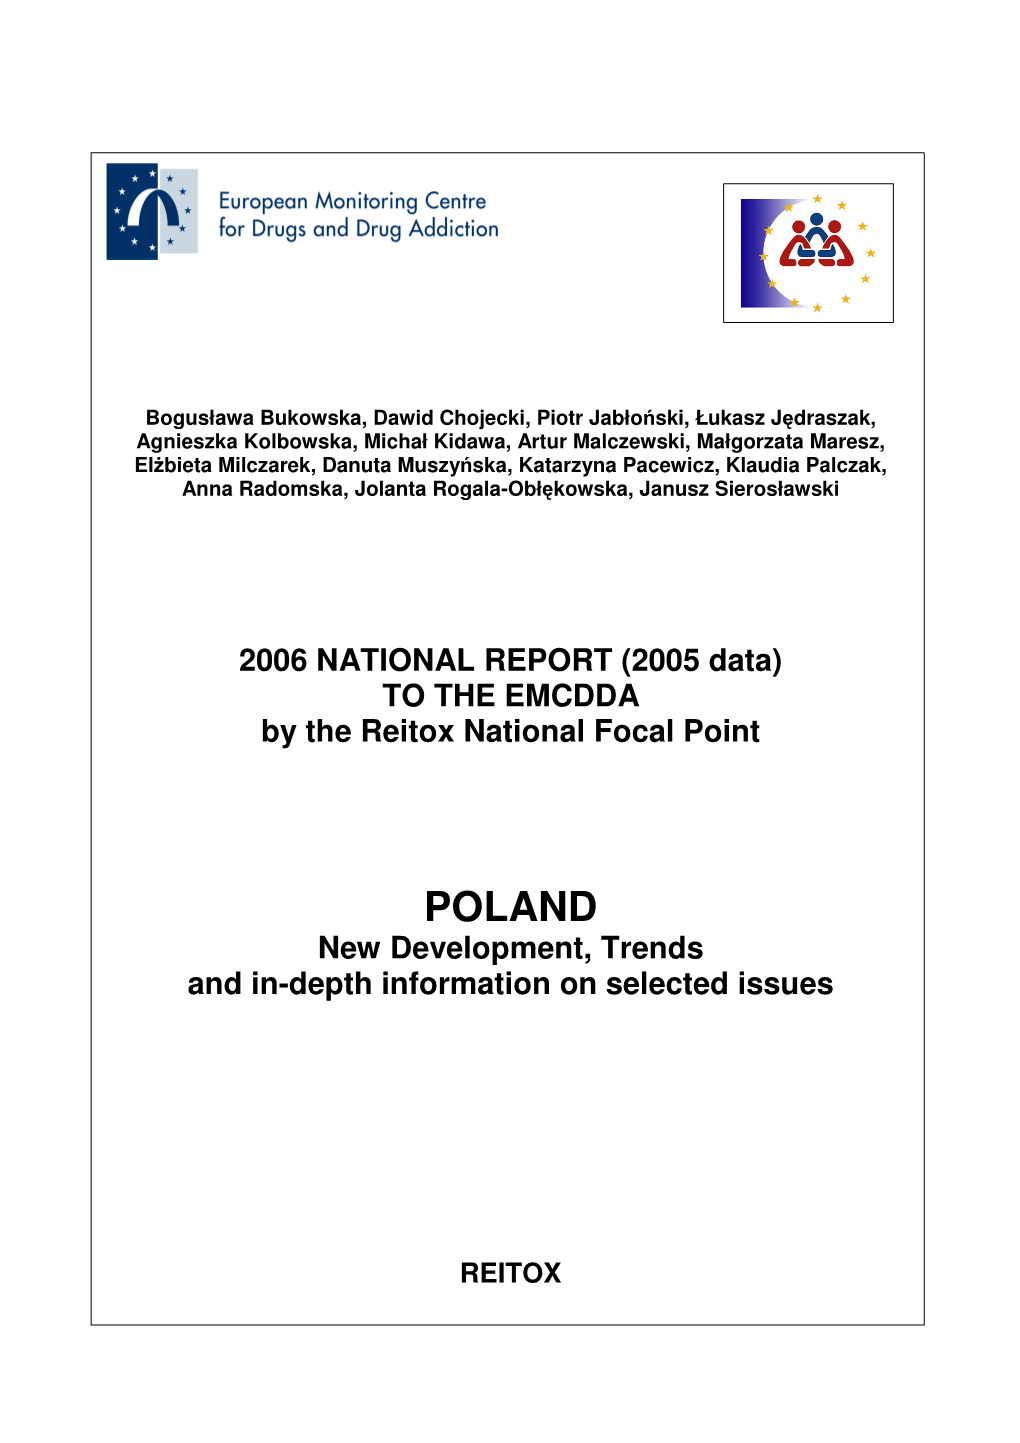 POLAND New Development, Trends and In-Depth Information on Selected Issues